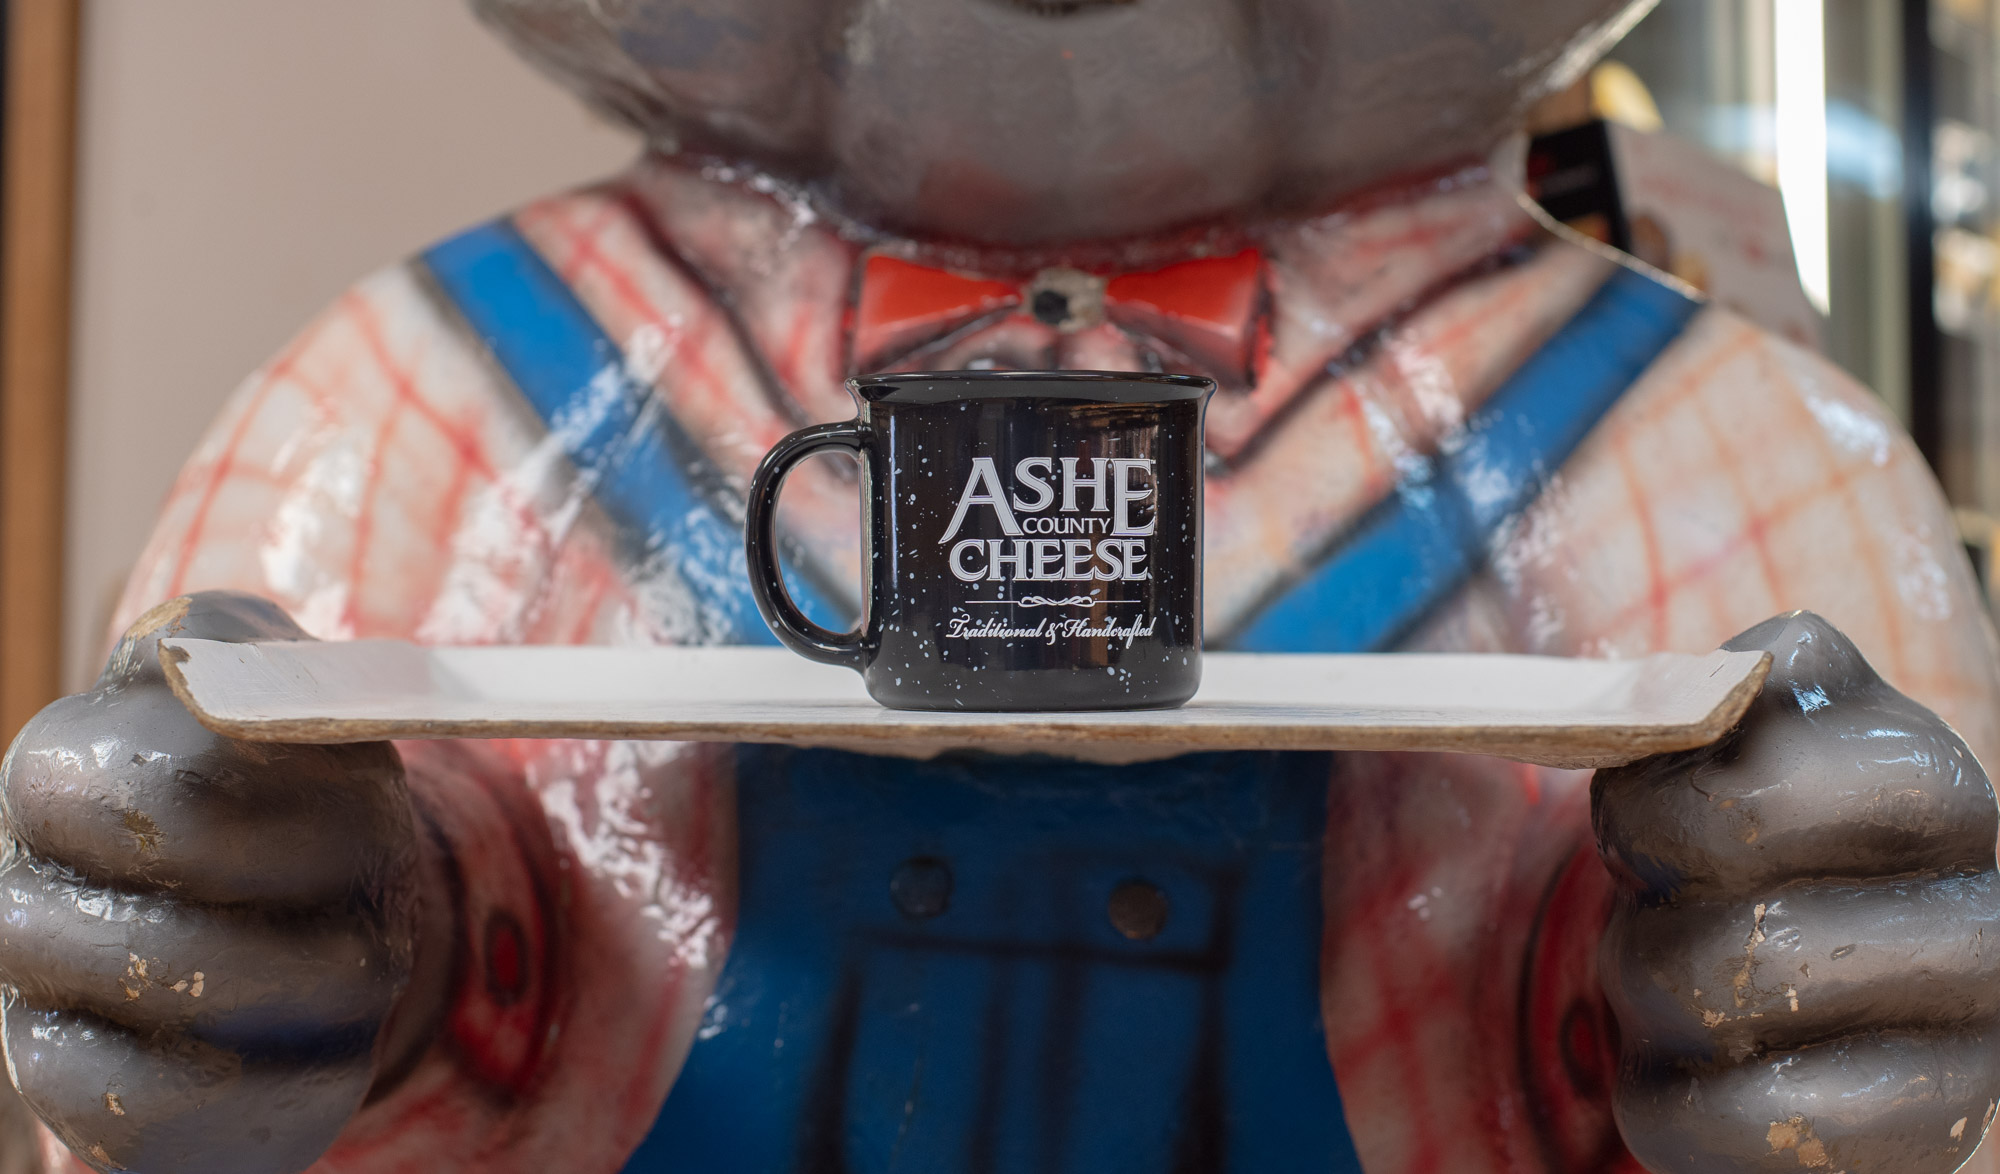 A mug saying "Ashe County Cheese" sits on a display tray held up by a ceramic animal